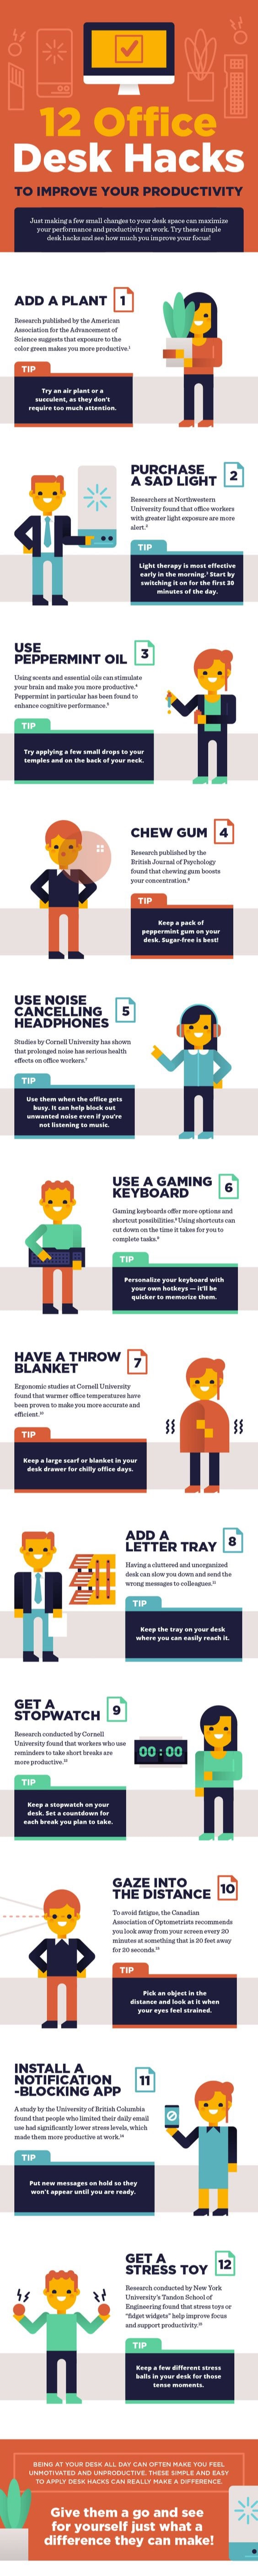 1. Add a Plant! 2. Purchase a better light 3. Use Peppermint Oil 4. Chew Gum 5. Use Noise Cancelling Headphones 6. Use a Gaming Keyboard 7. Have a Throw Blanket 8. Add a Letter Tray 9. Get a Stopwatch 10. Gaze into the Distance 11, Install a Notification-Blocking App 12. Get a Stress Toy